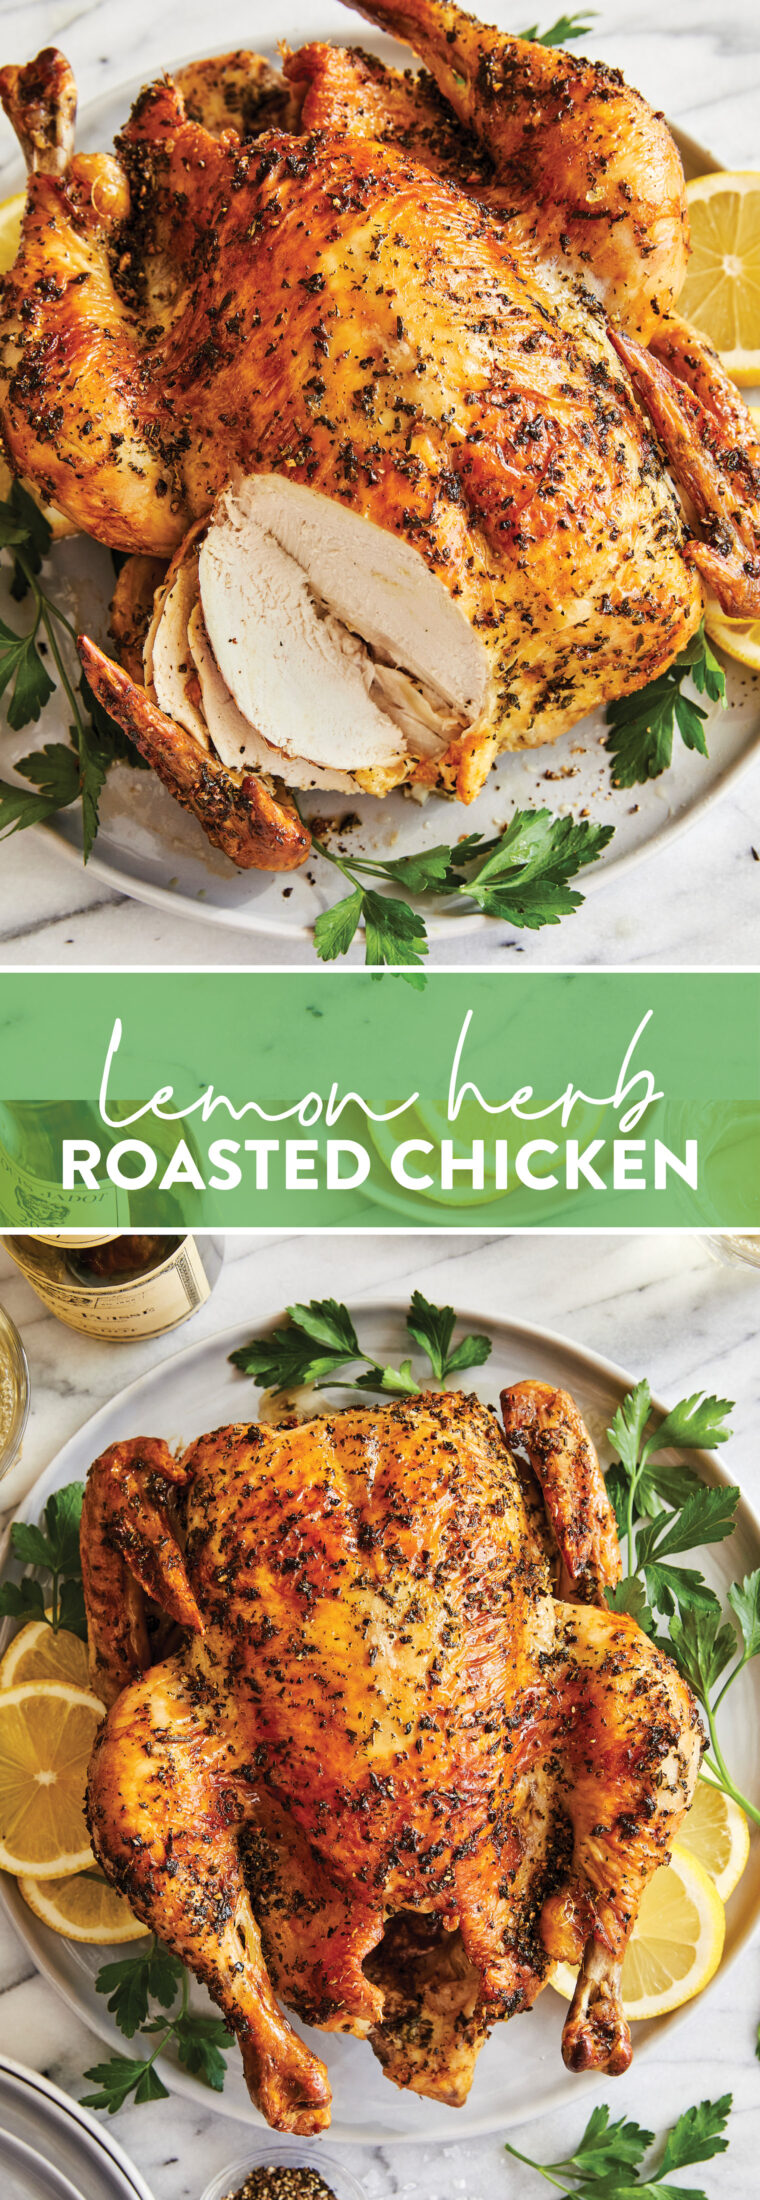 Lemon Herb Roasted Chicken - PERFECT roasted chicken! All you need is 6 ingredients. So so easy and amazingly juicy with the crispiest skin!